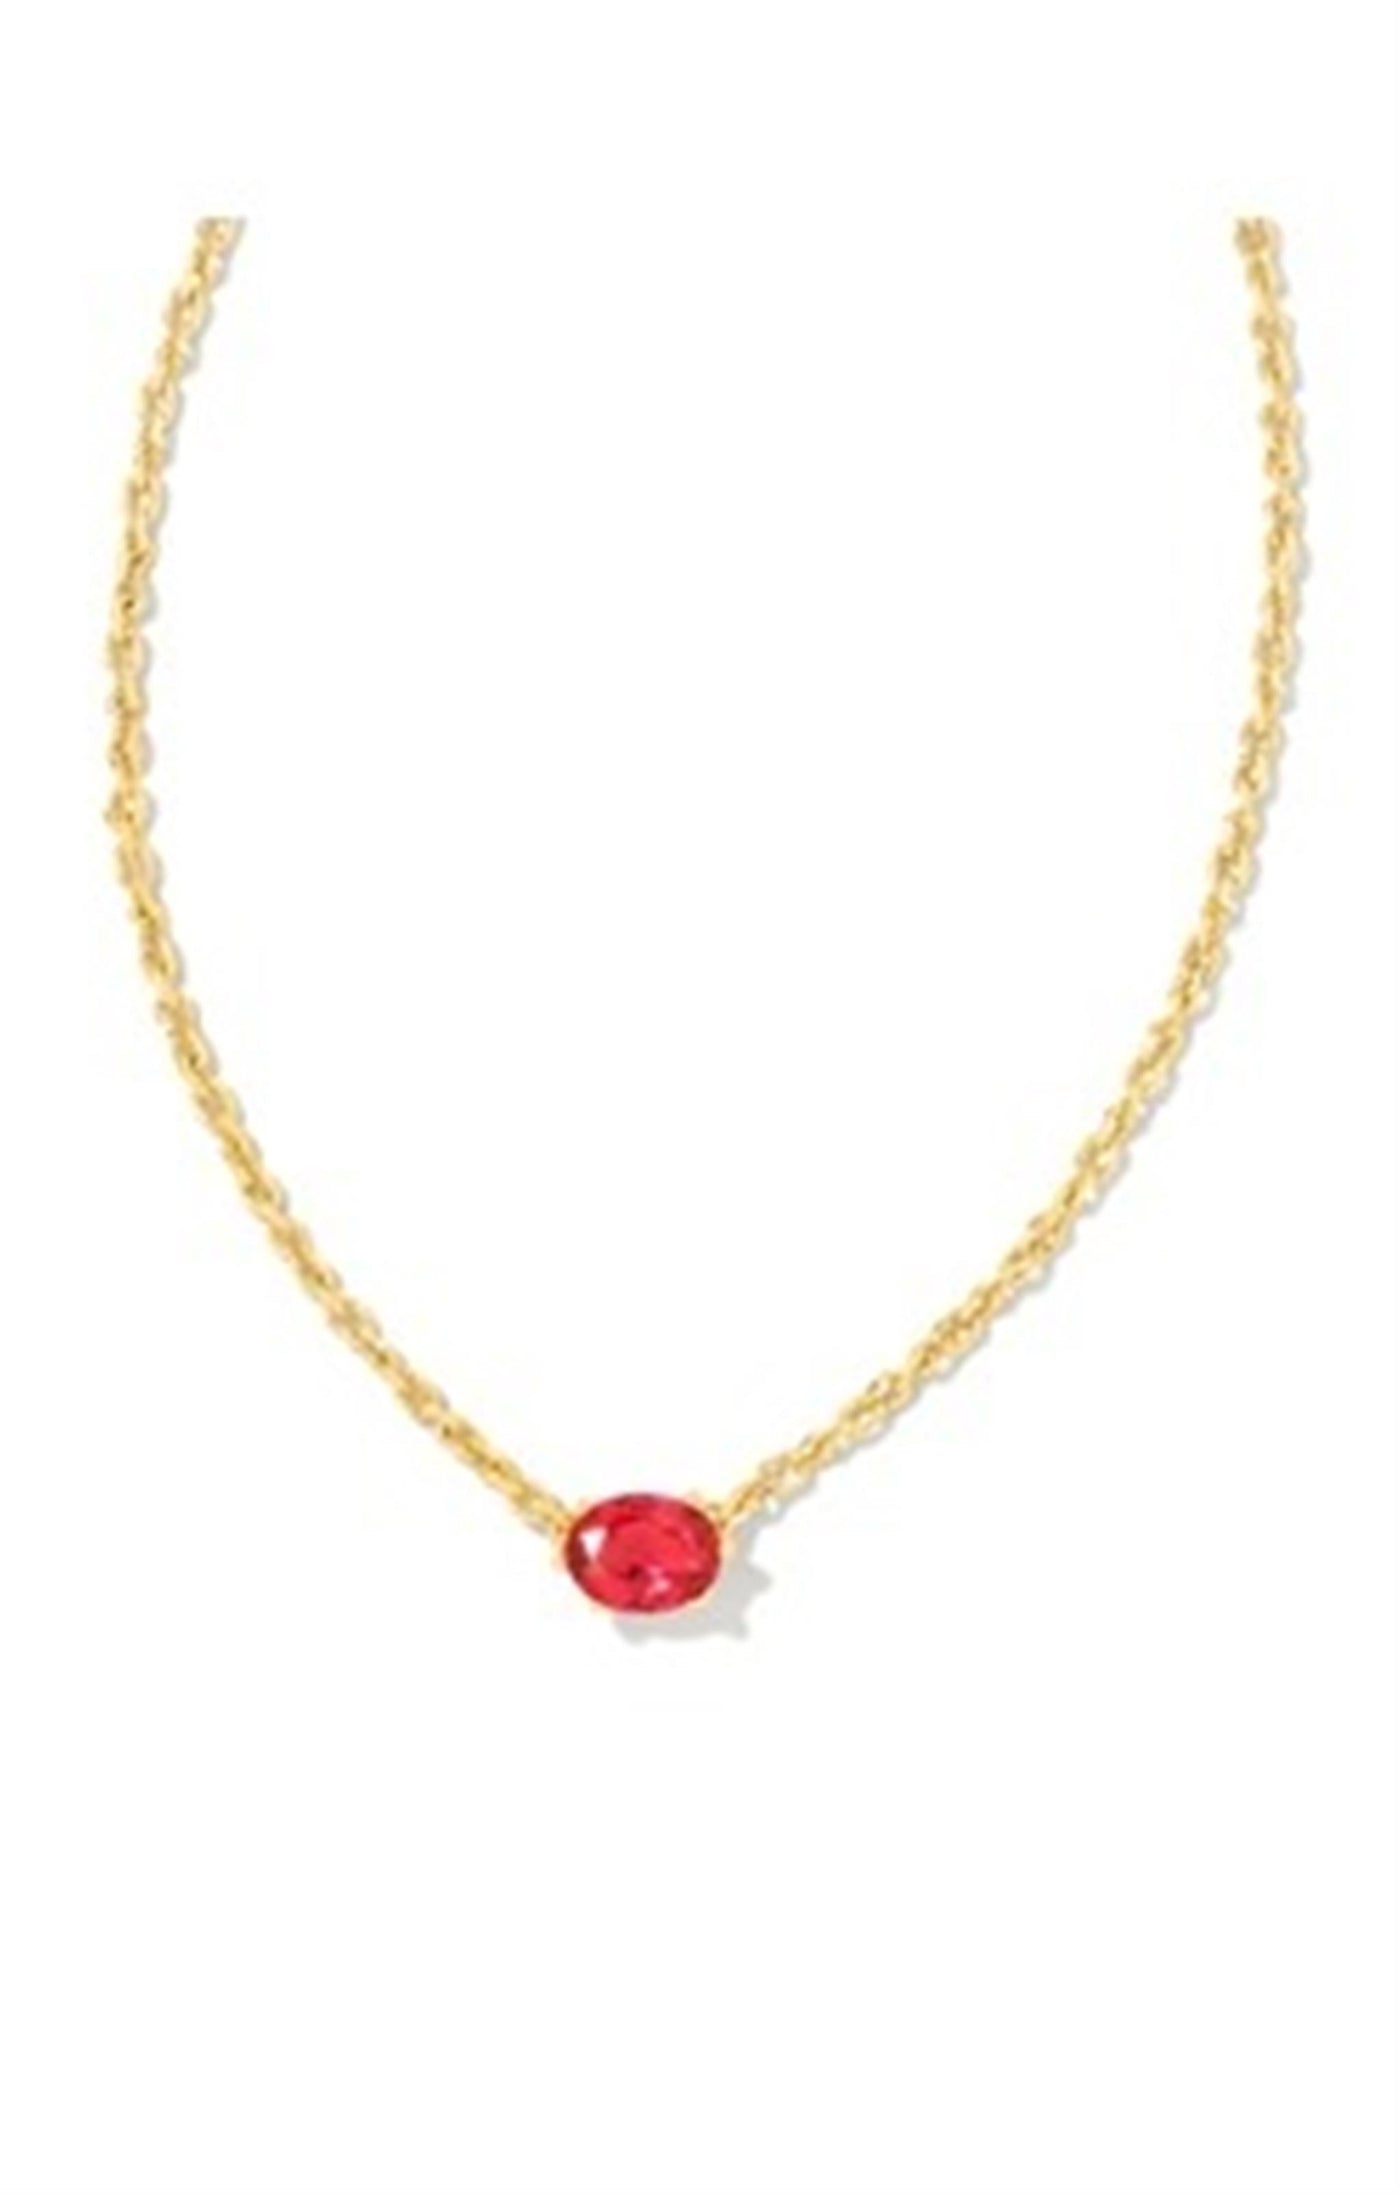 Gold Tone Necklace Featuring Red Crystal by Kendra Scott